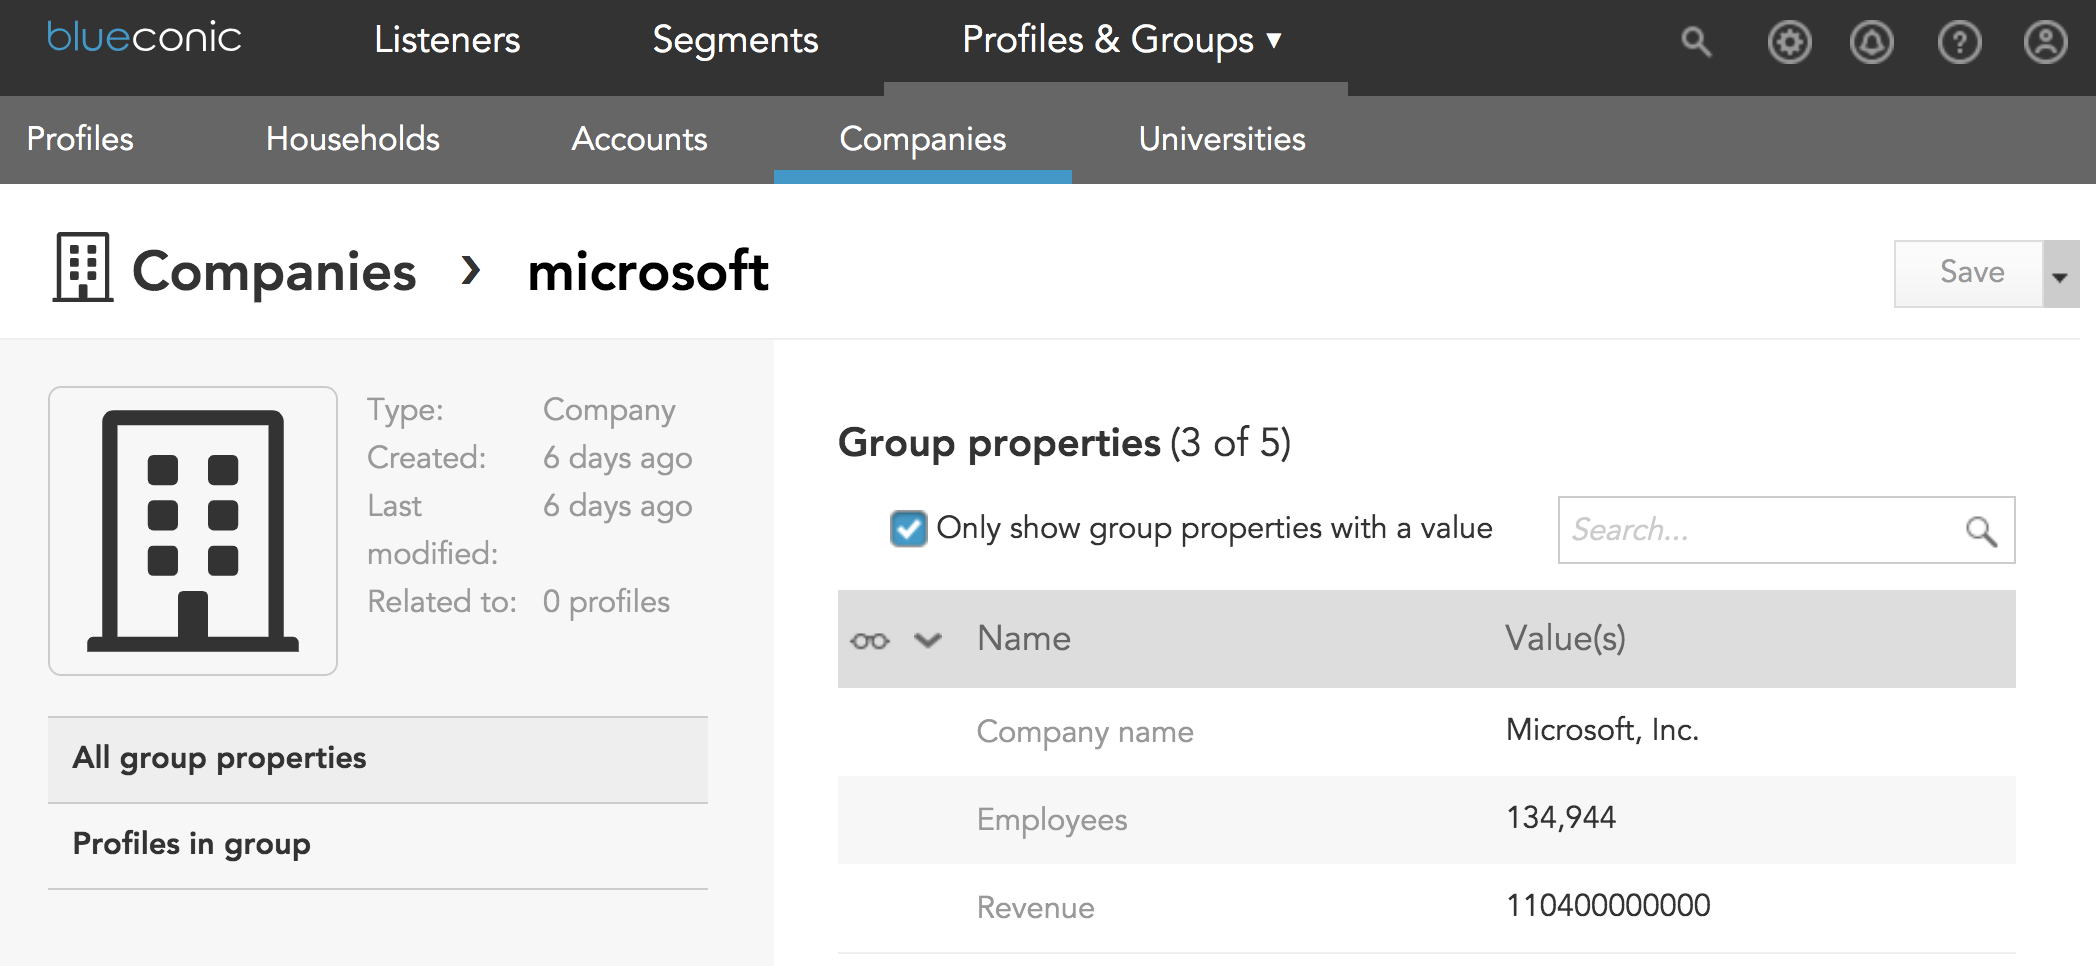 Can I create a company property to group employee profiles in a company group in BlueConic?